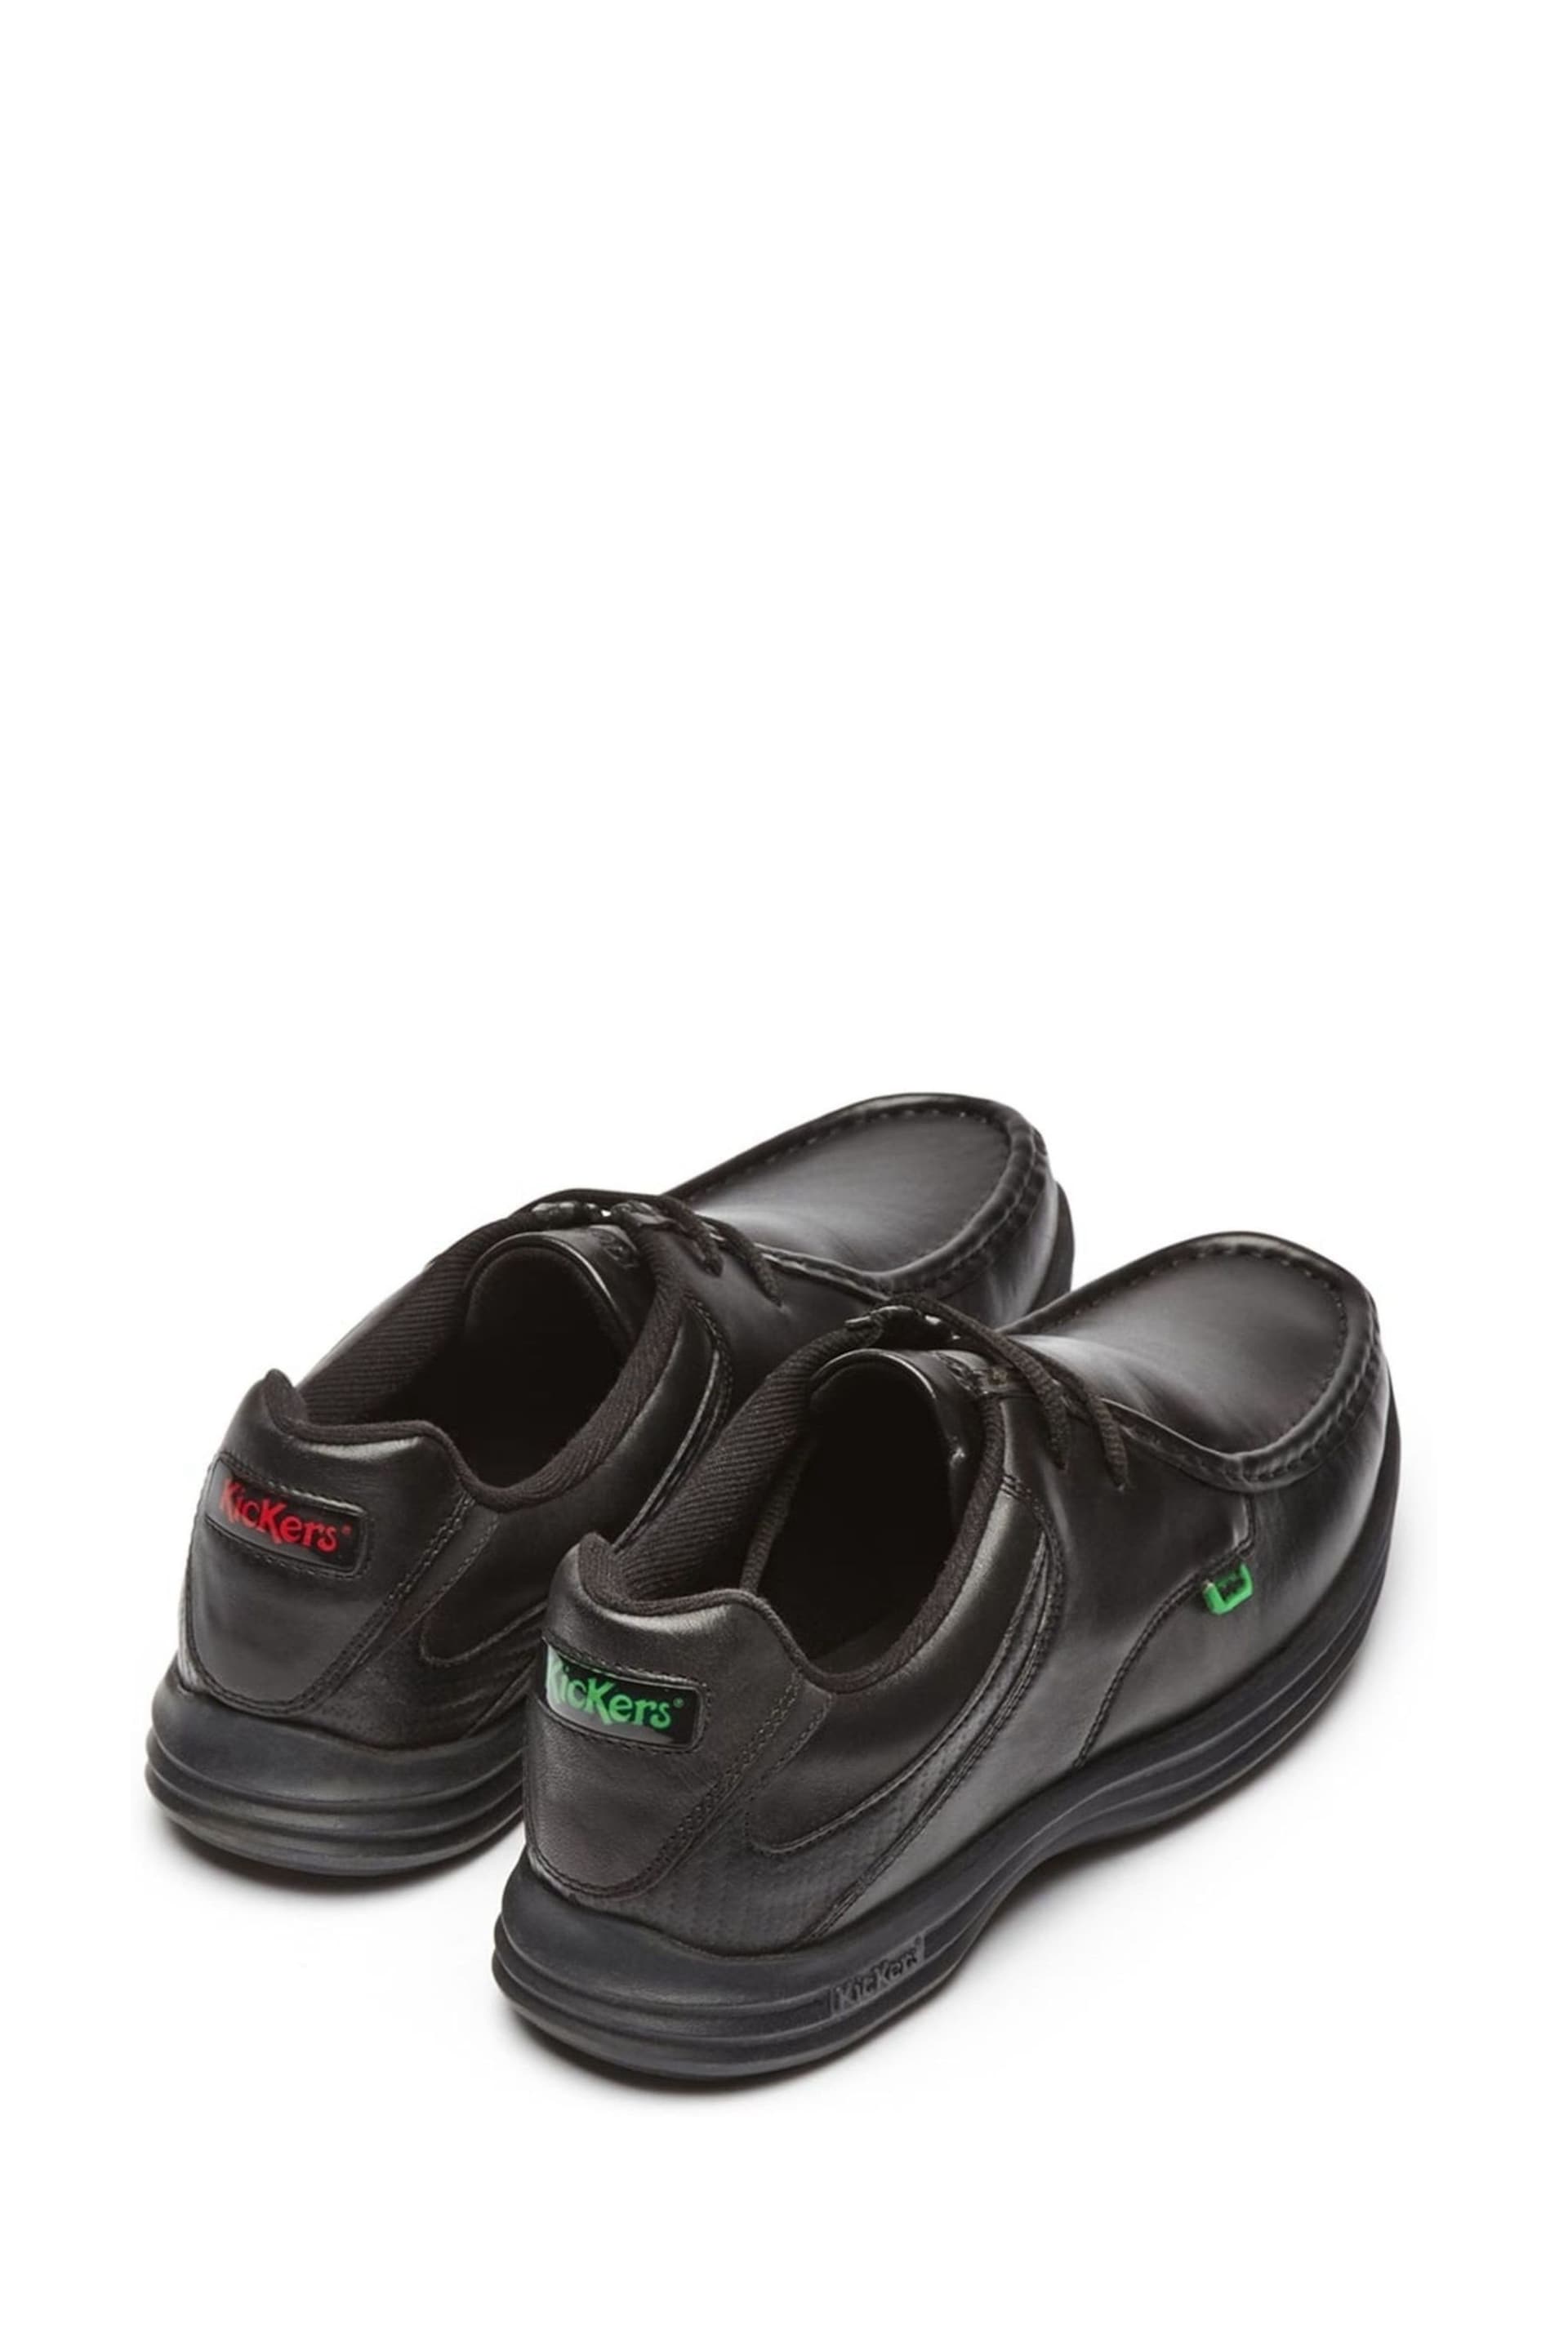 Kickers Youth Reasan Strap Leather Black Shoes - Image 2 of 4